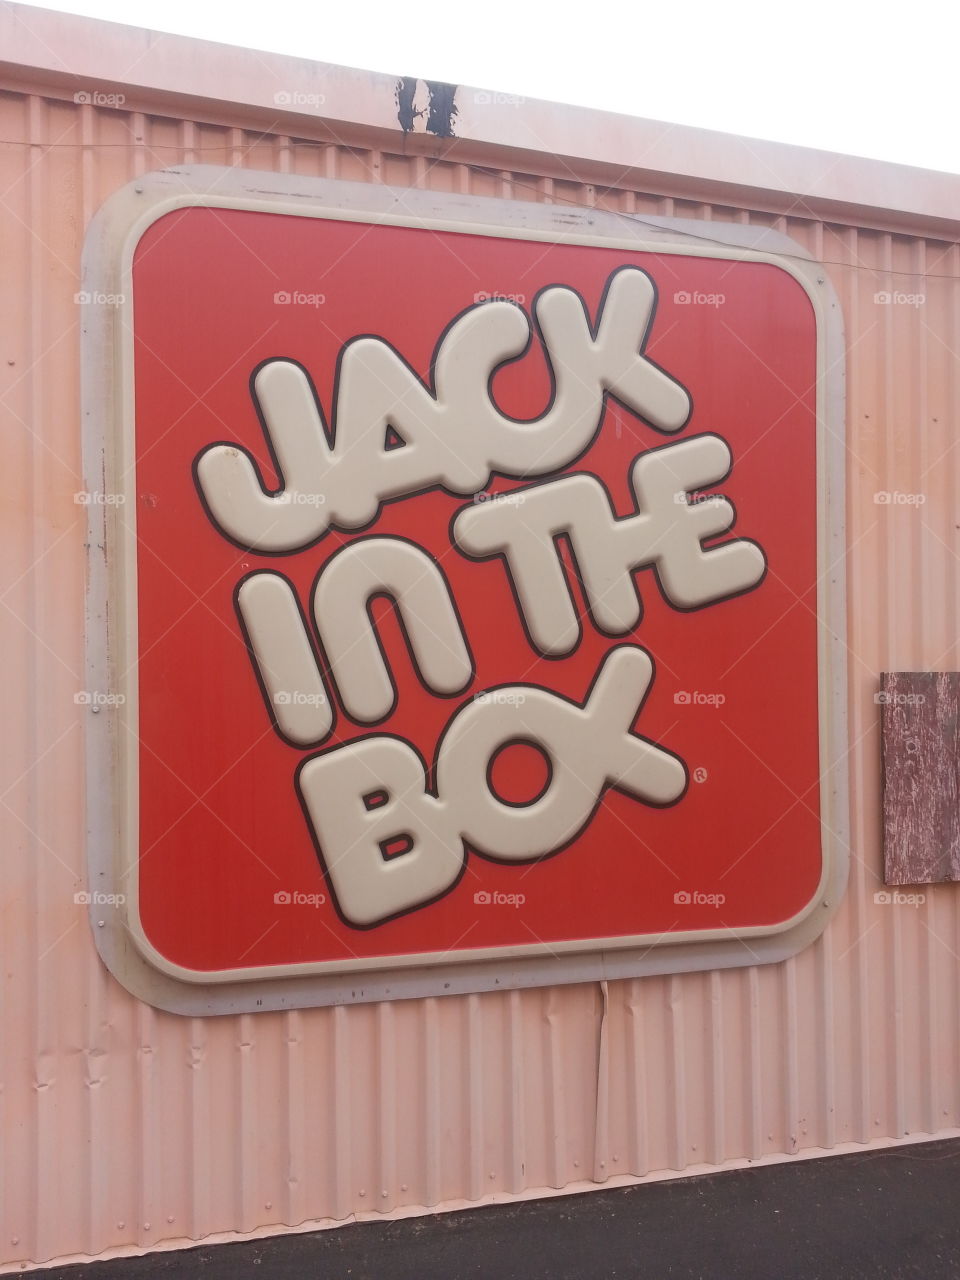 Jack in the Box logo sign